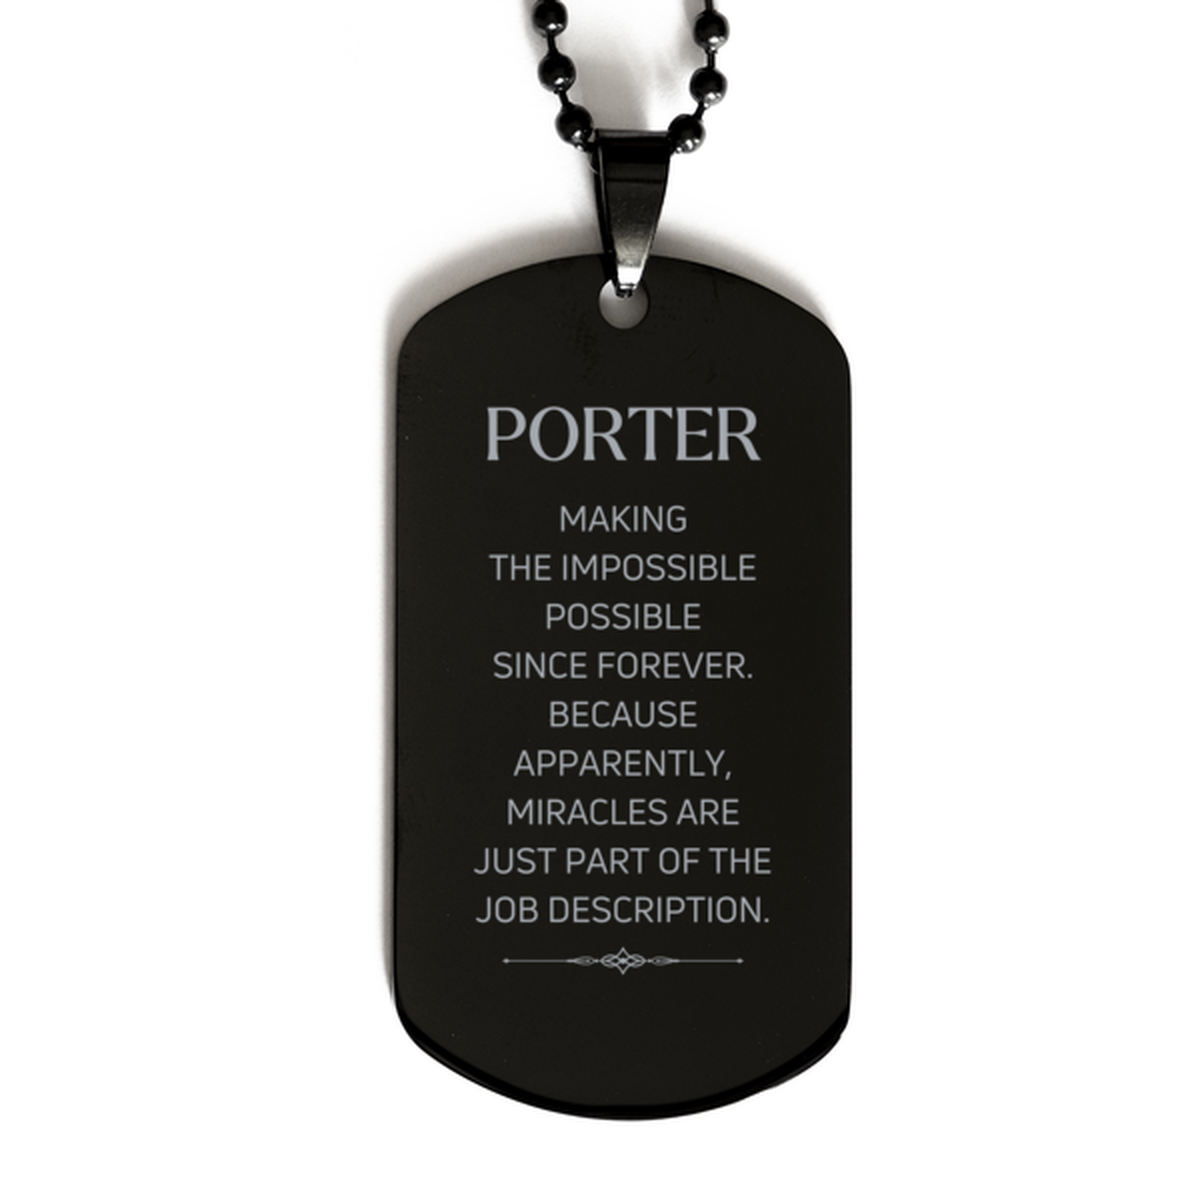 Funny Porter Gifts, Miracles are just part of the job description, Inspirational Birthday Black Dog Tag For Porter, Men, Women, Coworkers, Friends, Boss